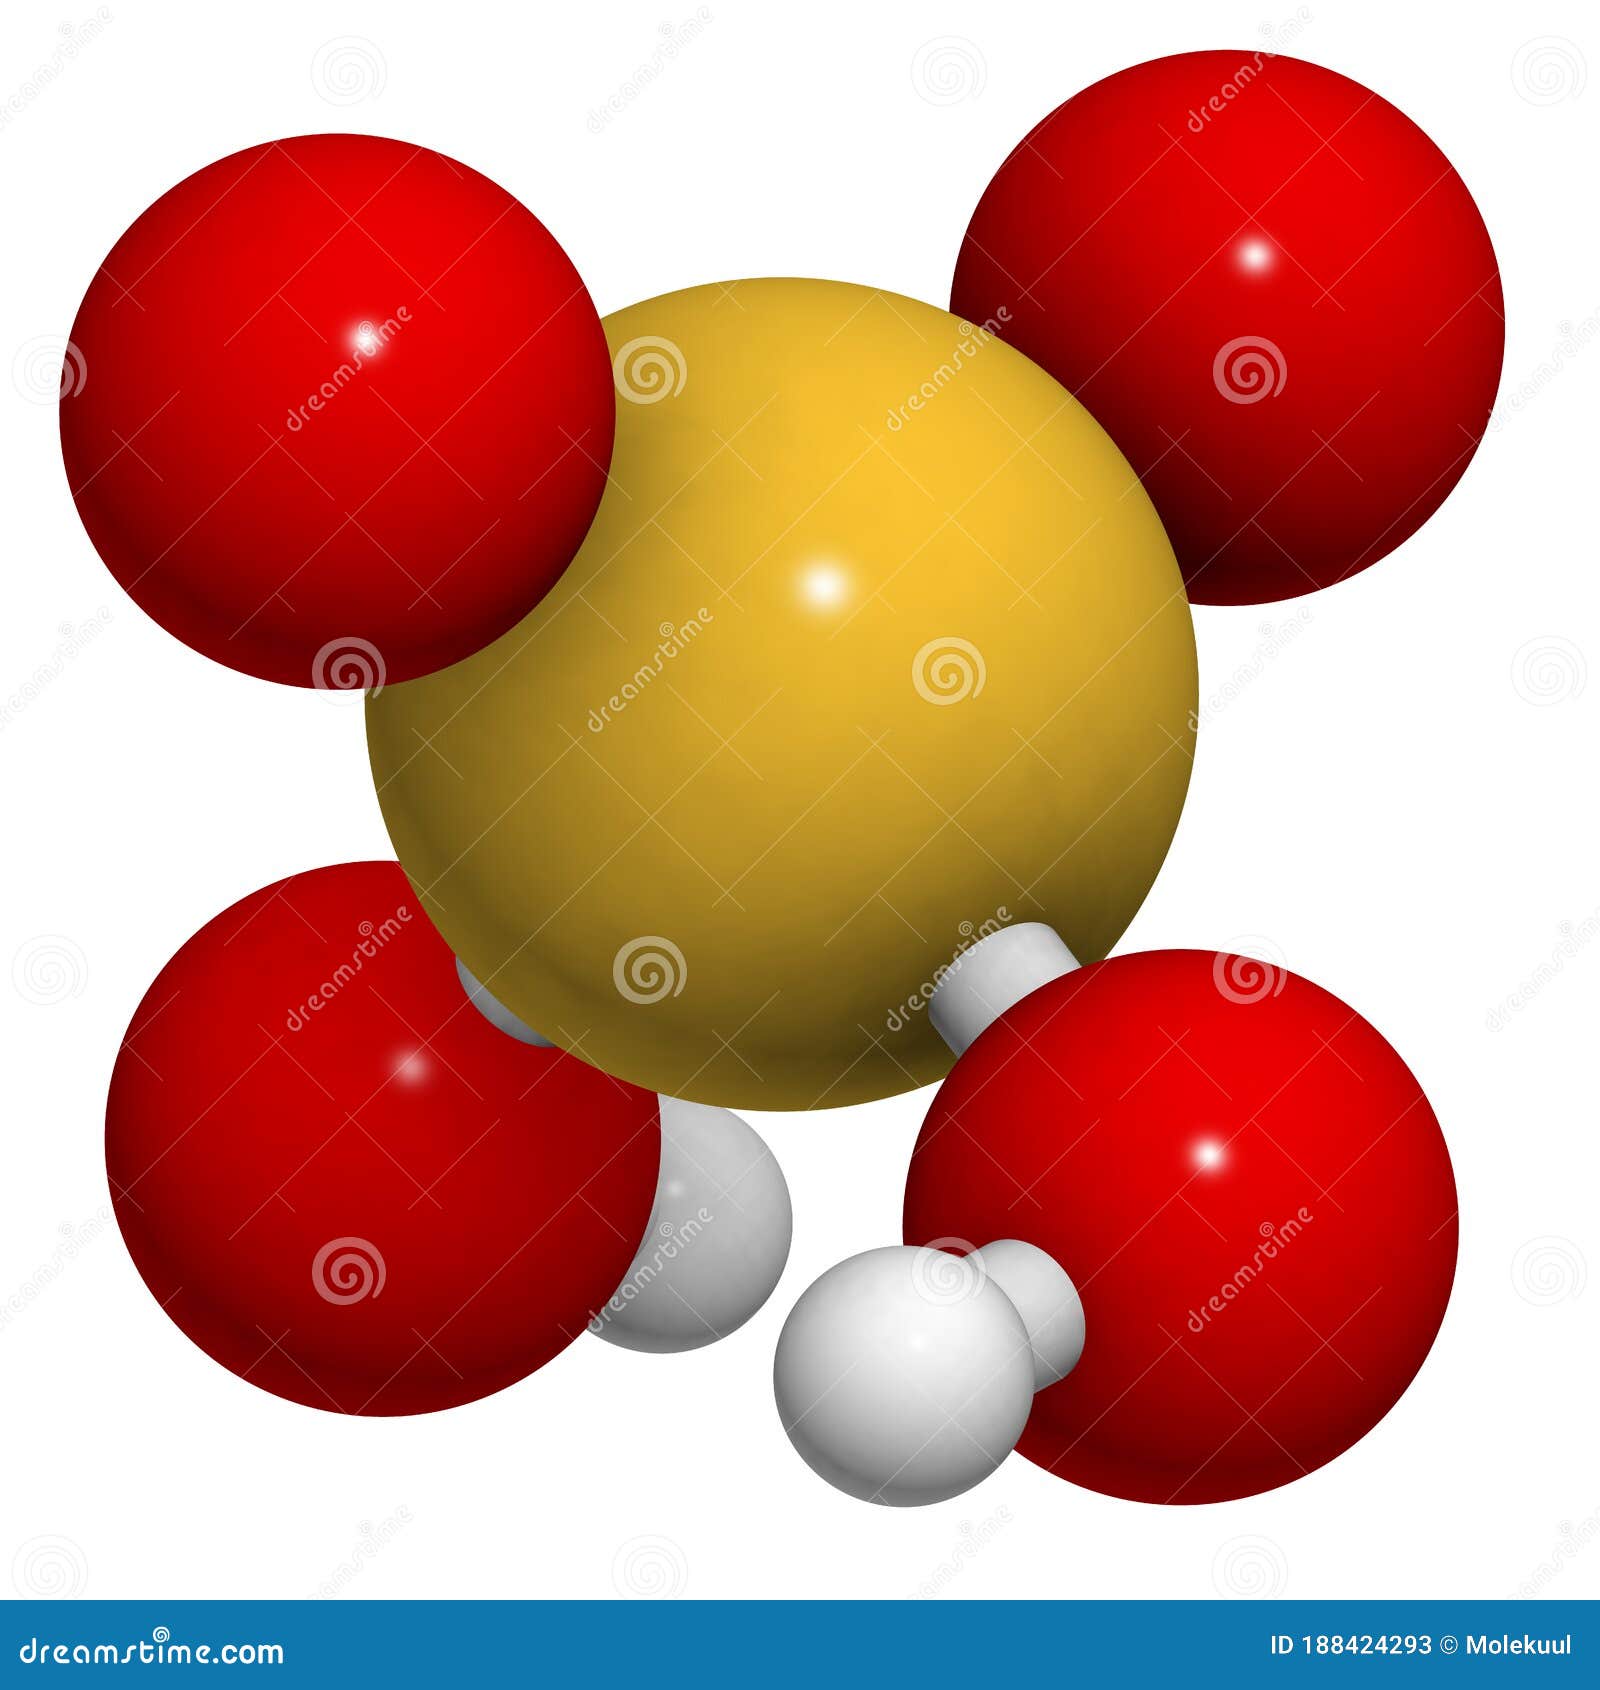 Sulfuric Acid H2so4 Oil Of Vitriol Molecule Chemical Structure Highly Corrosive Strong Mineral Acid Used As An Electrolyte Stock Illustration Illustration Of Titration Molecules 188424293